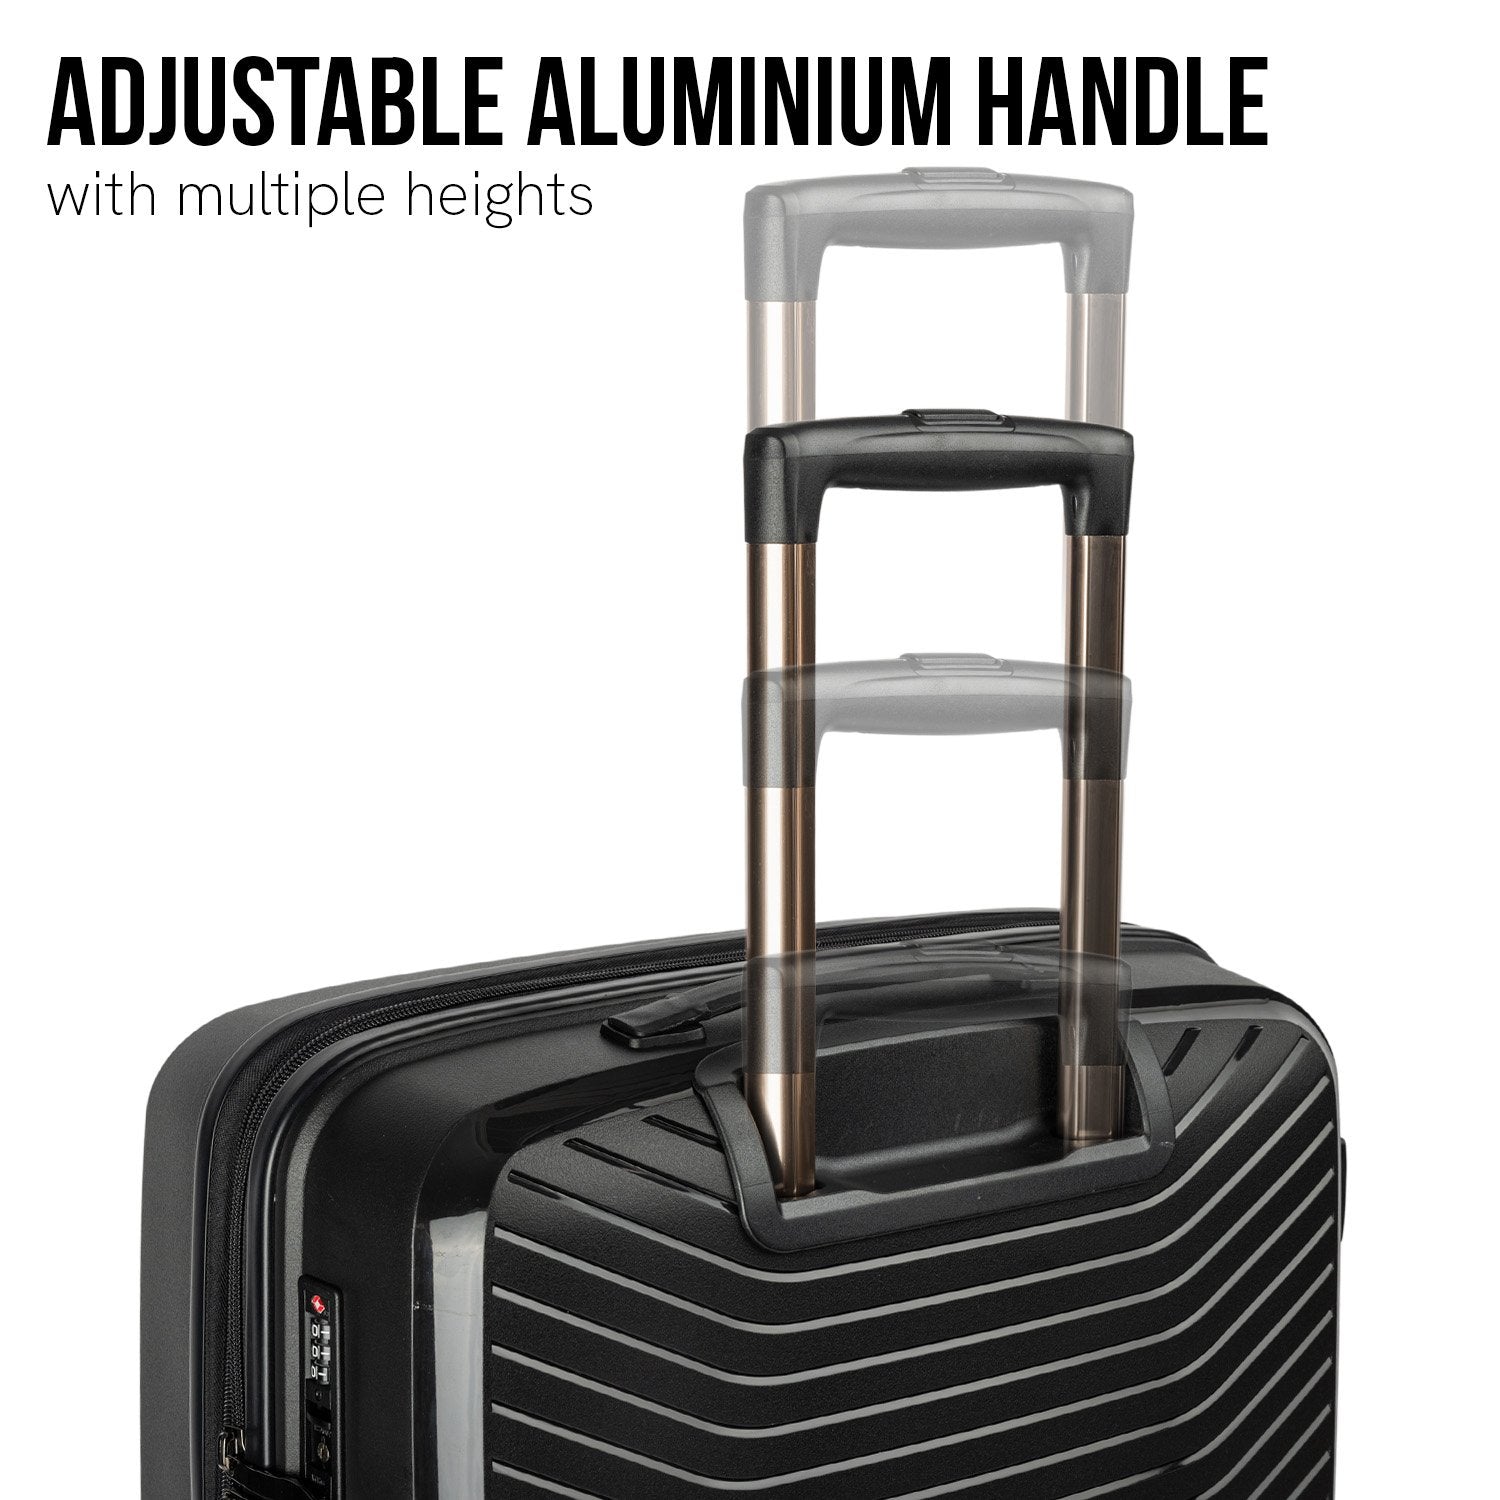 Olympus Astra 24in Lightweight Hard Shell Suitcase - Obsidian Black-Home &amp; Garden-PEROZ Accessories